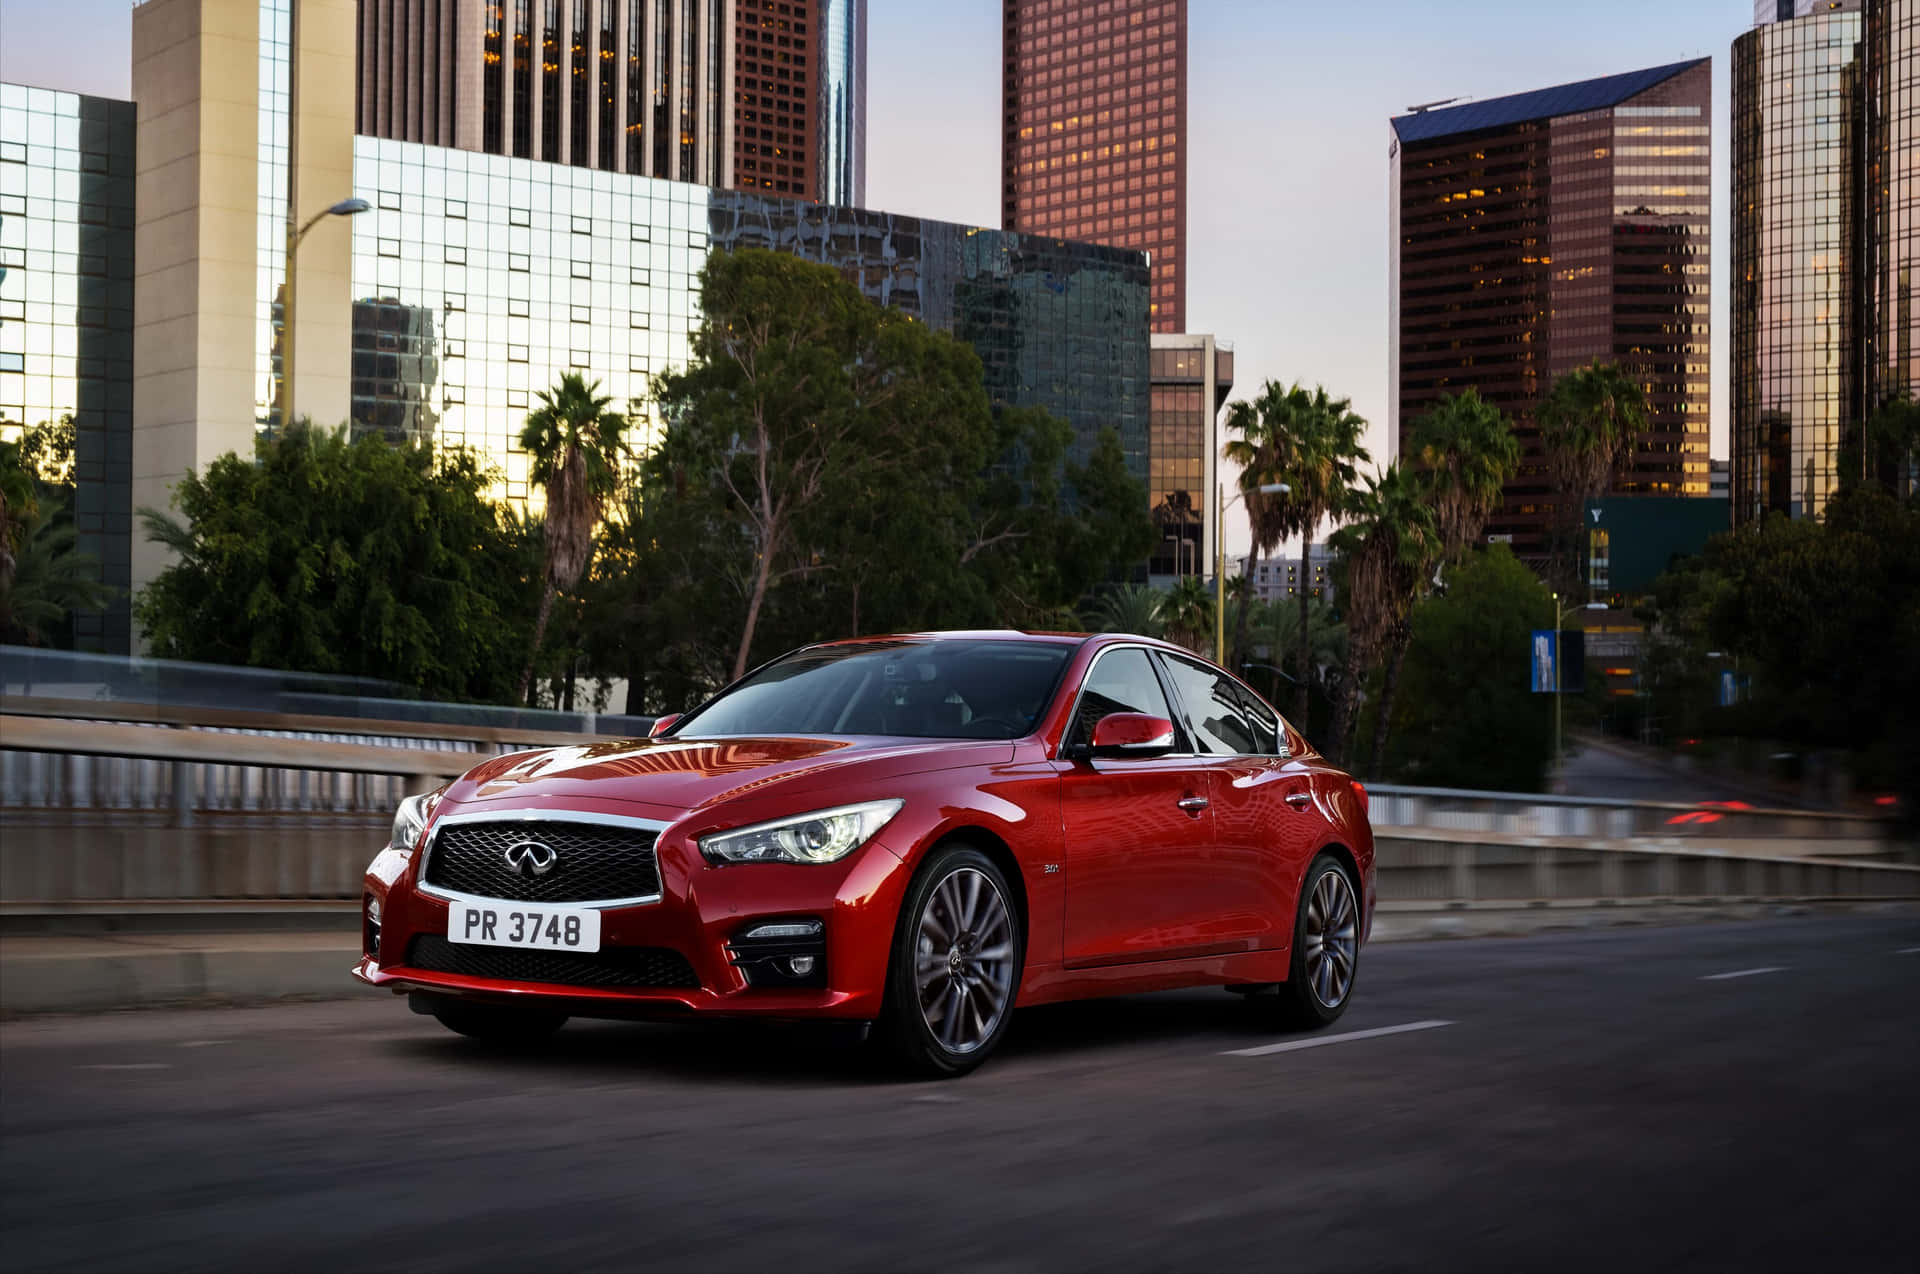 The Red Infiniti Q50 Is Driving Down The Road Wallpaper